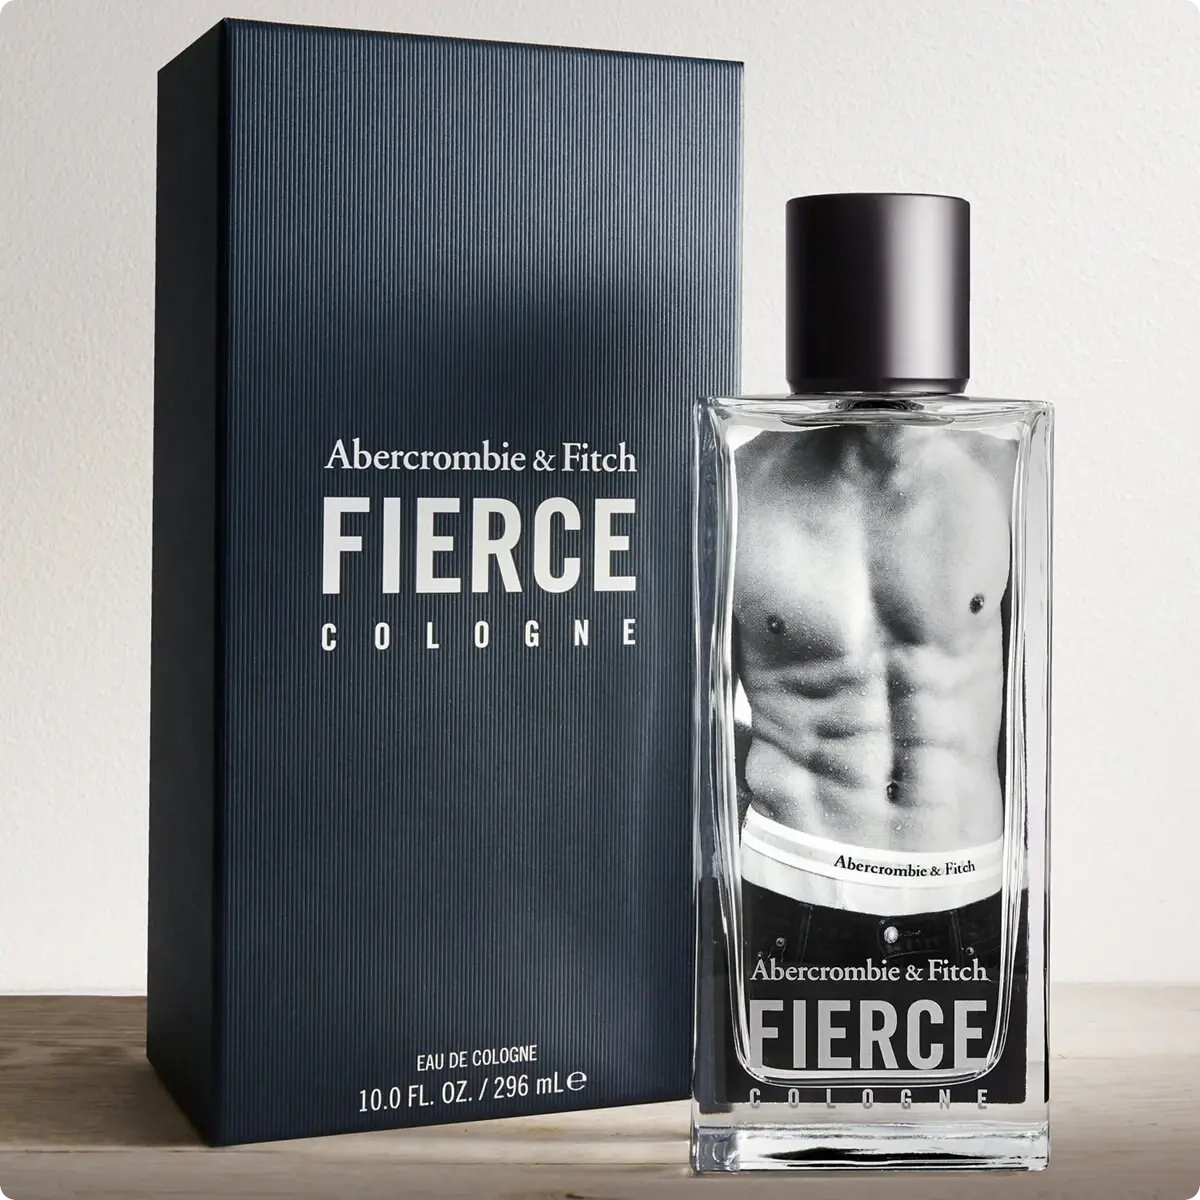 Abercrombie fitch fierce. Abercrombie Fitch Fierce Cologne 100 ml. Духи Abercrombie Fitch Fierce. Мужские духи Abercrombie and Fitch Fierce. Abercrombie & Fitch Fierce 50.